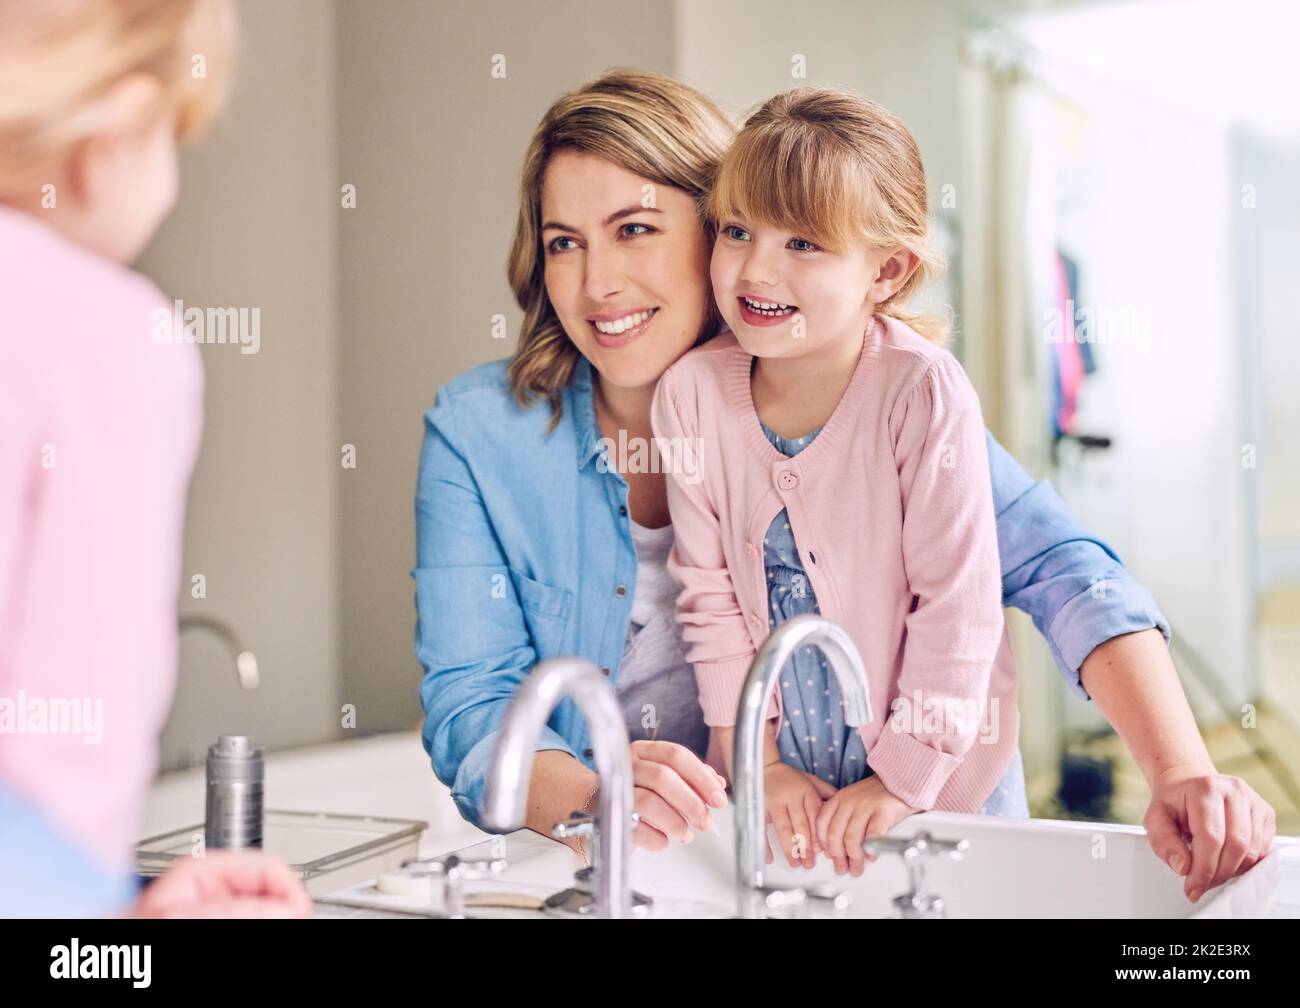 It can be fun indoors. Shot of a cheerful young mother and her daughter washing hands while looking at their reflection in a mirror. Stock Photo